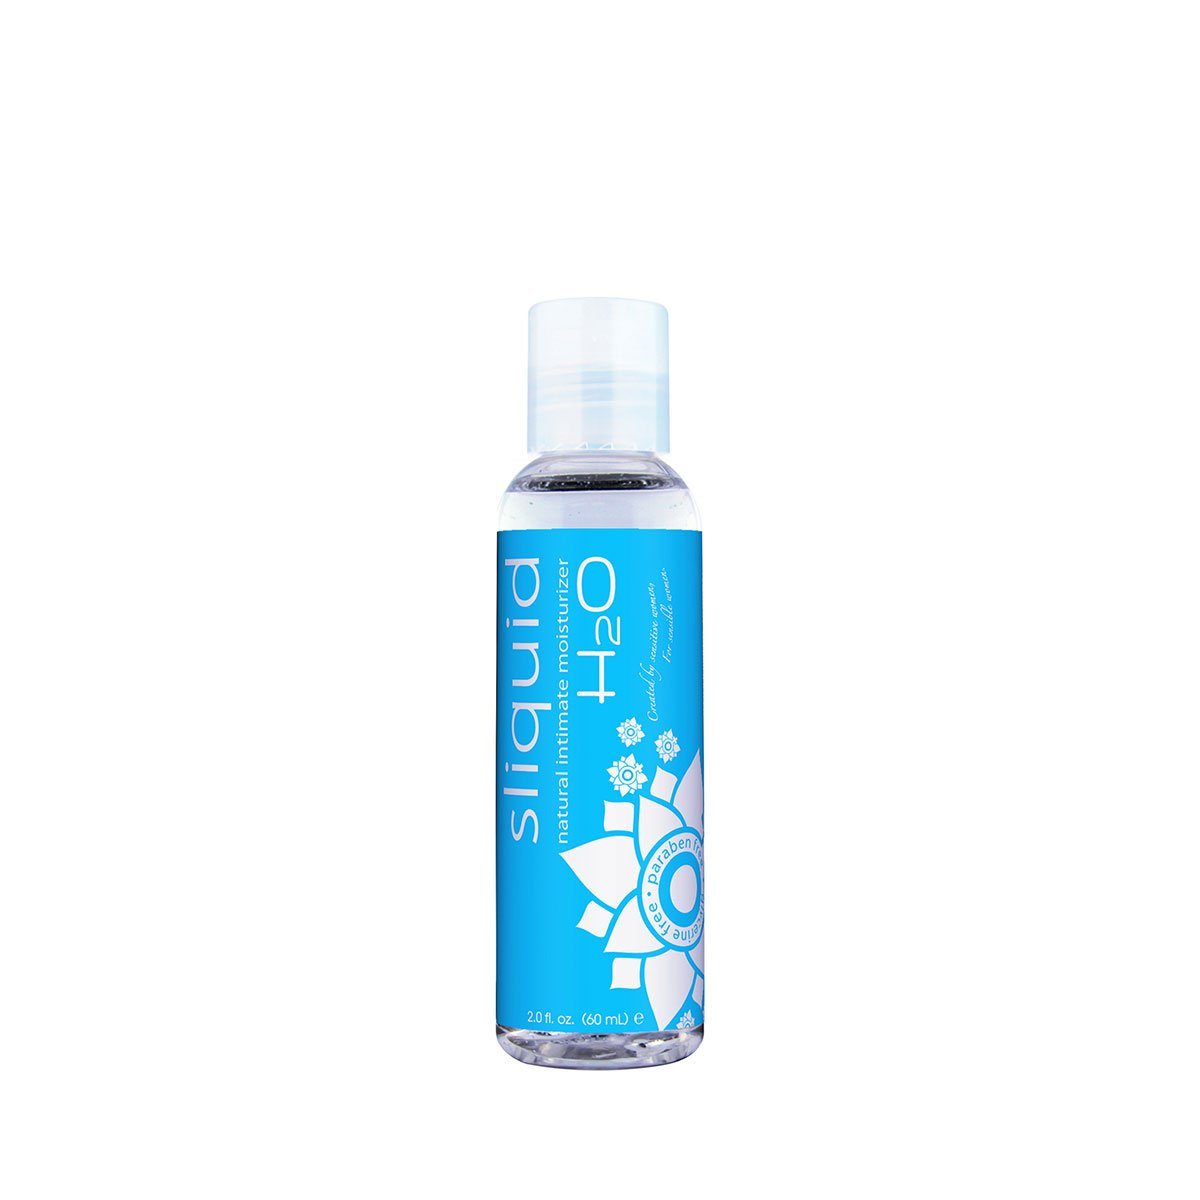 Sliquid Naturals H2O water based personal lubricant - Hamilton Park Electronics